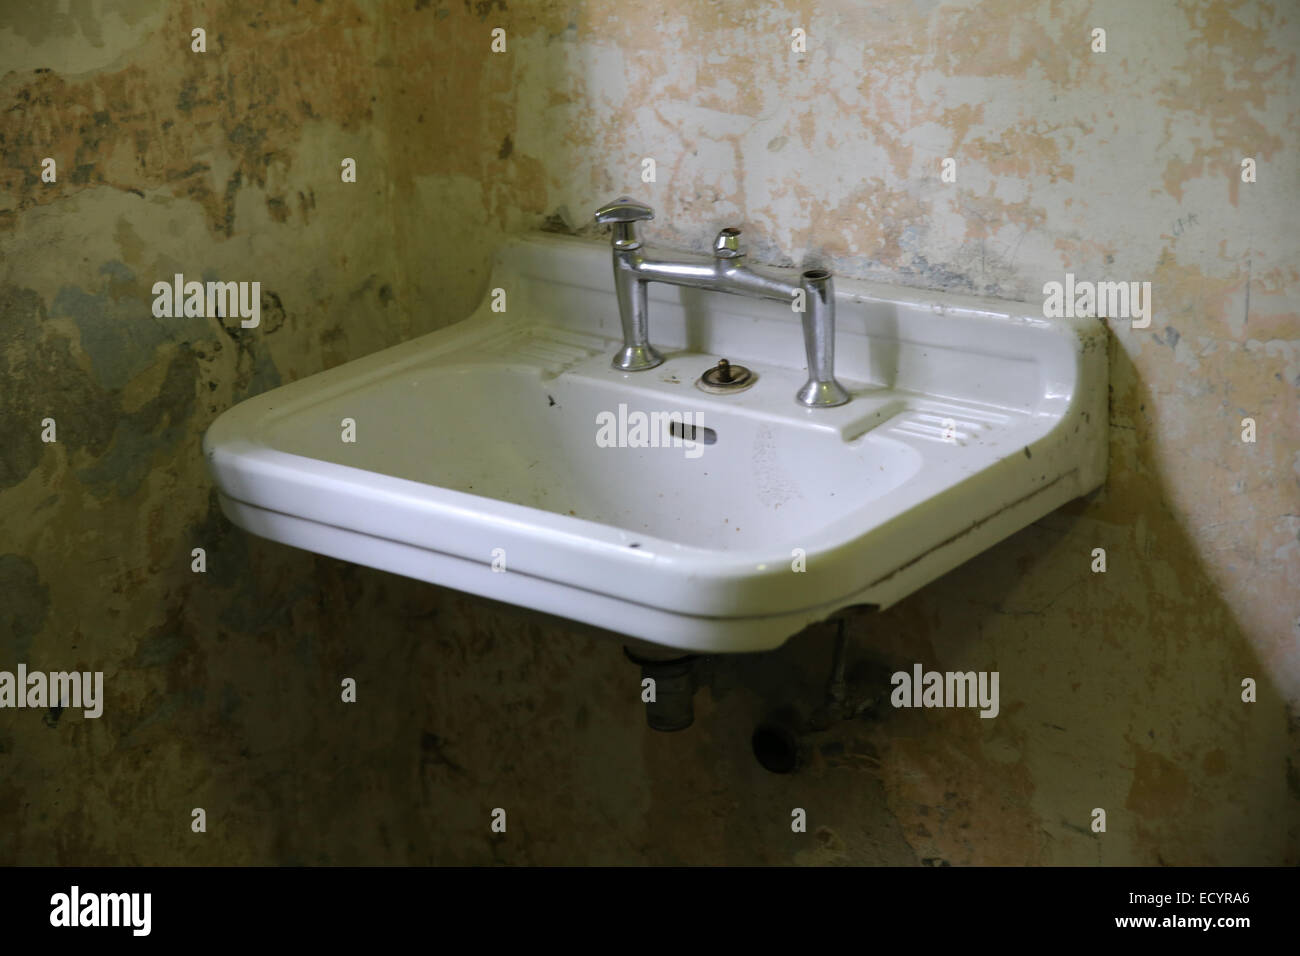 broken bathroom faucet concentration camp world war two Stock Photo